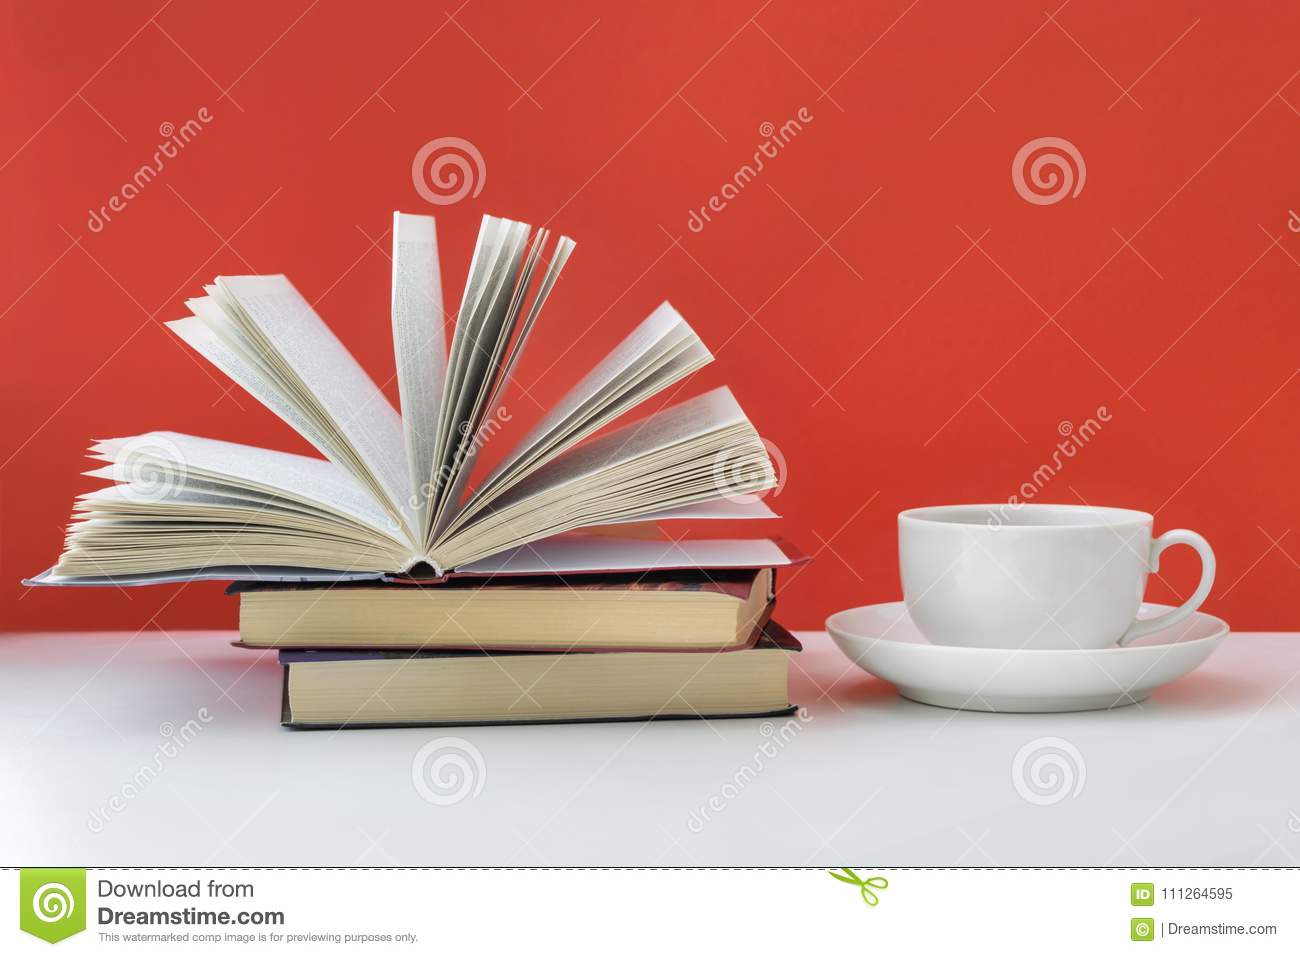 Red Open Book Logo - coffee-mug-books-red-background-table-open-book-rests-pile-copy ...